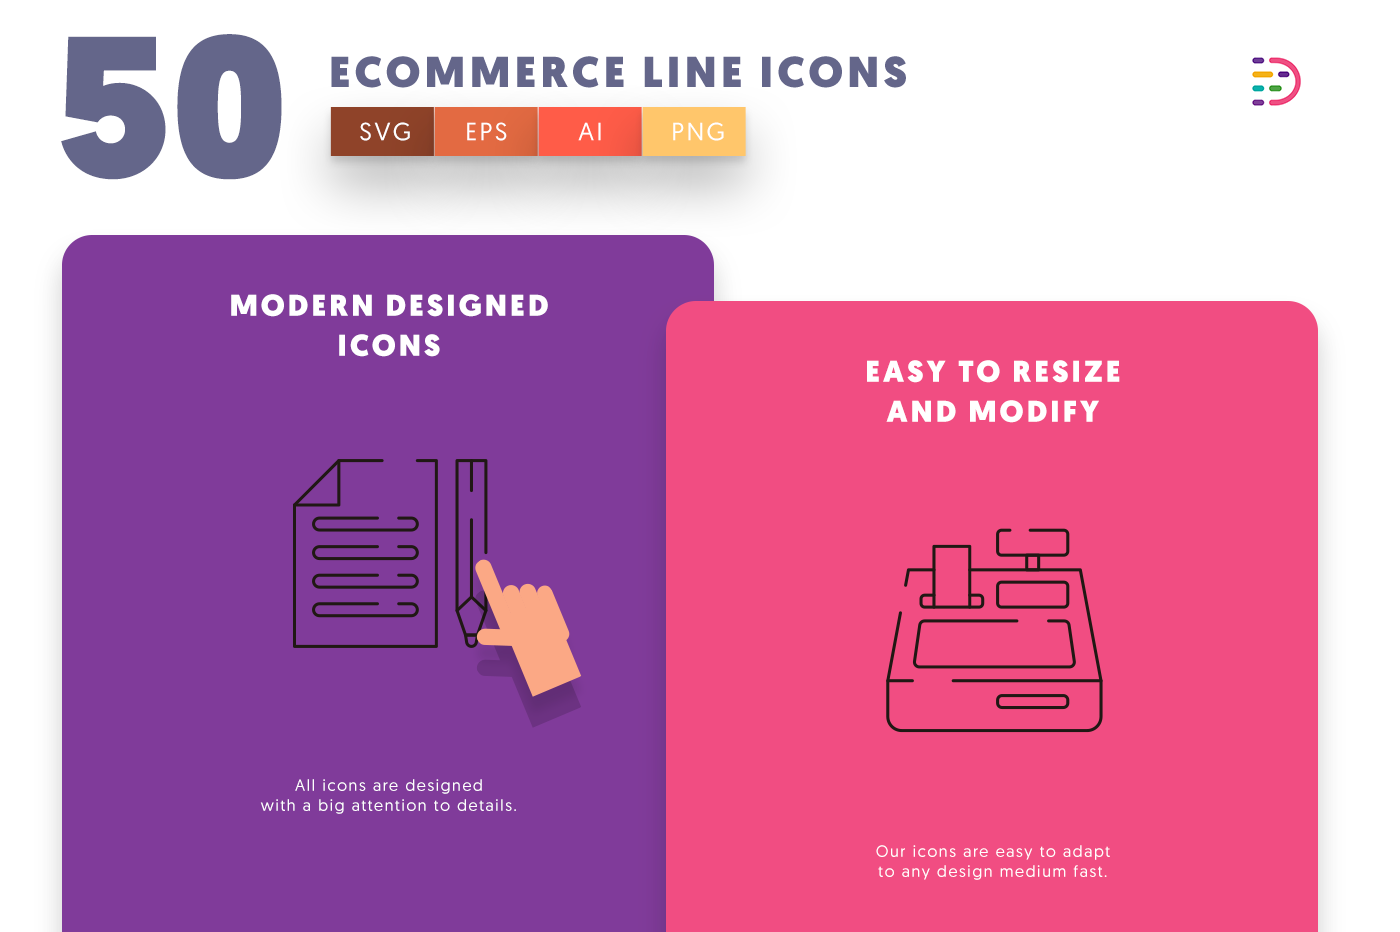 Ecommerce Line icons png/svg/eps